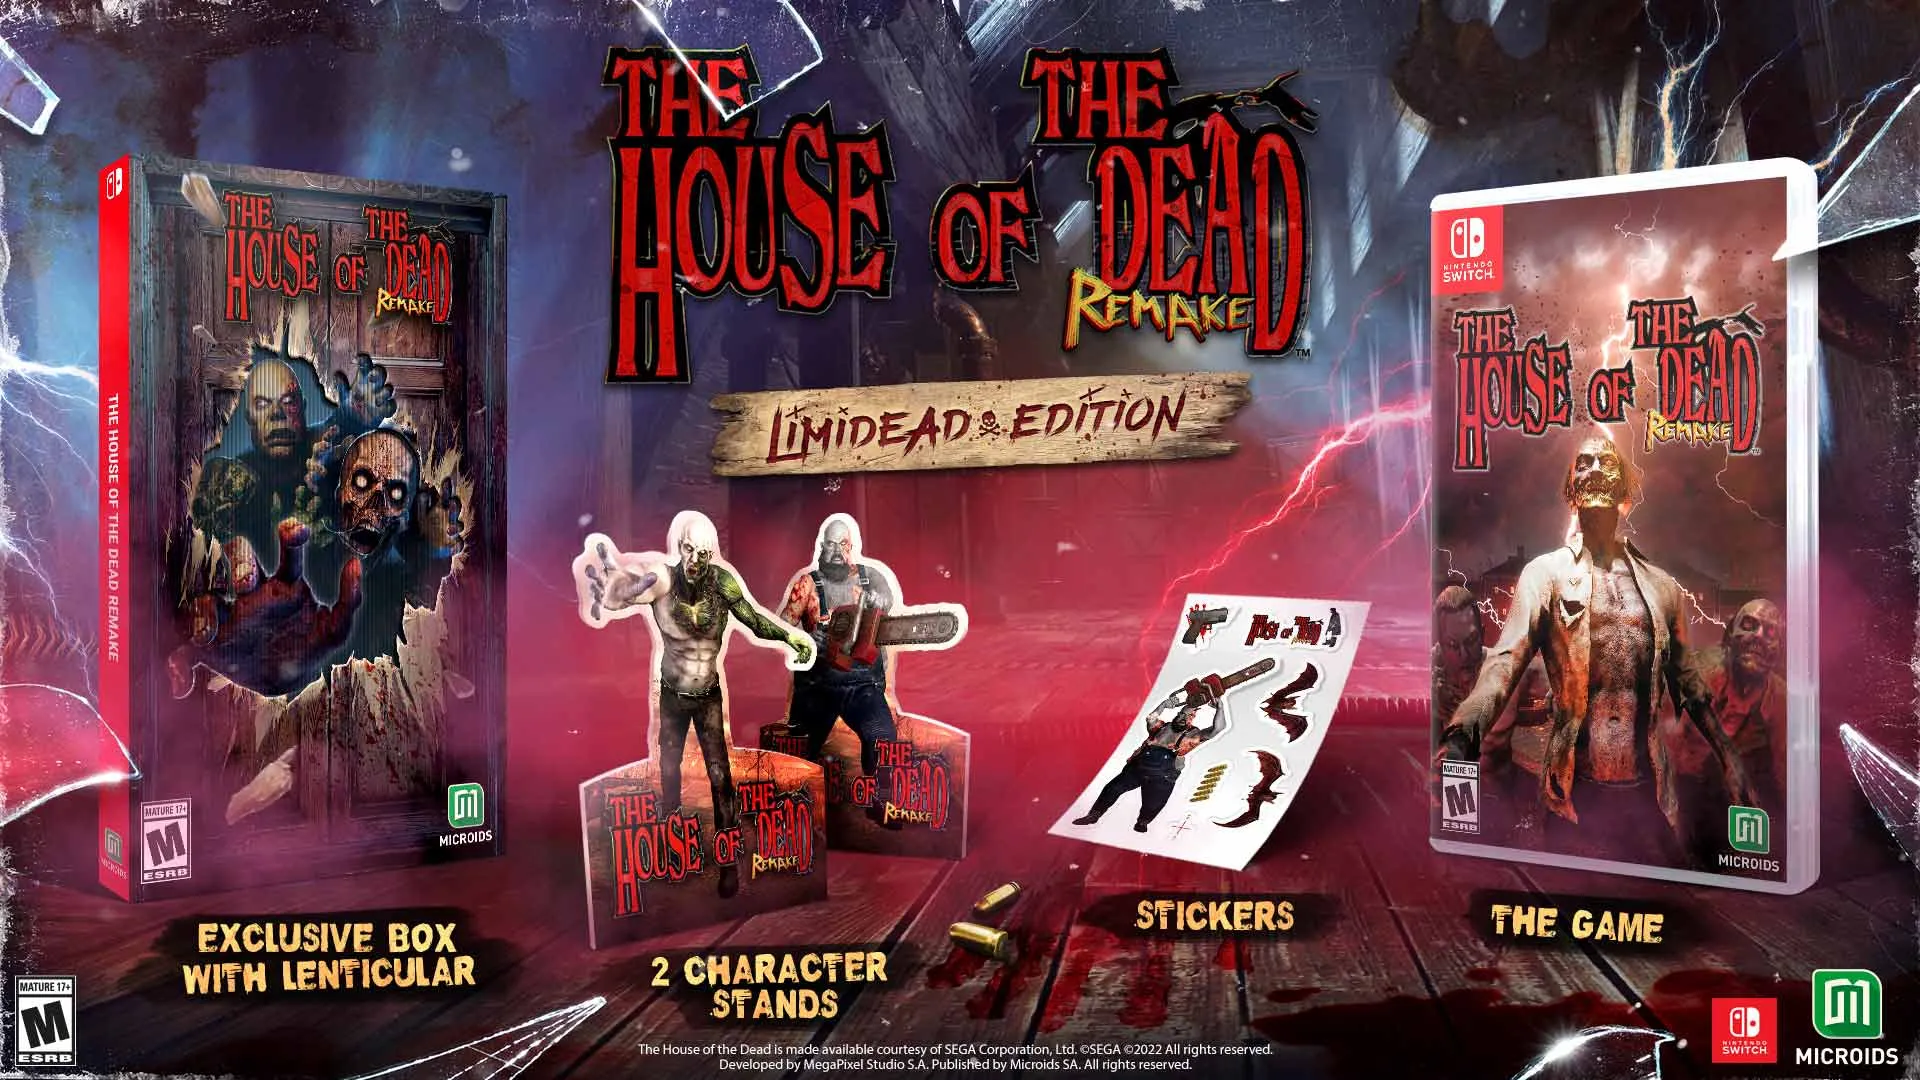 The House of the Dead: Remake Limidead Edition pre-orders open for Switch